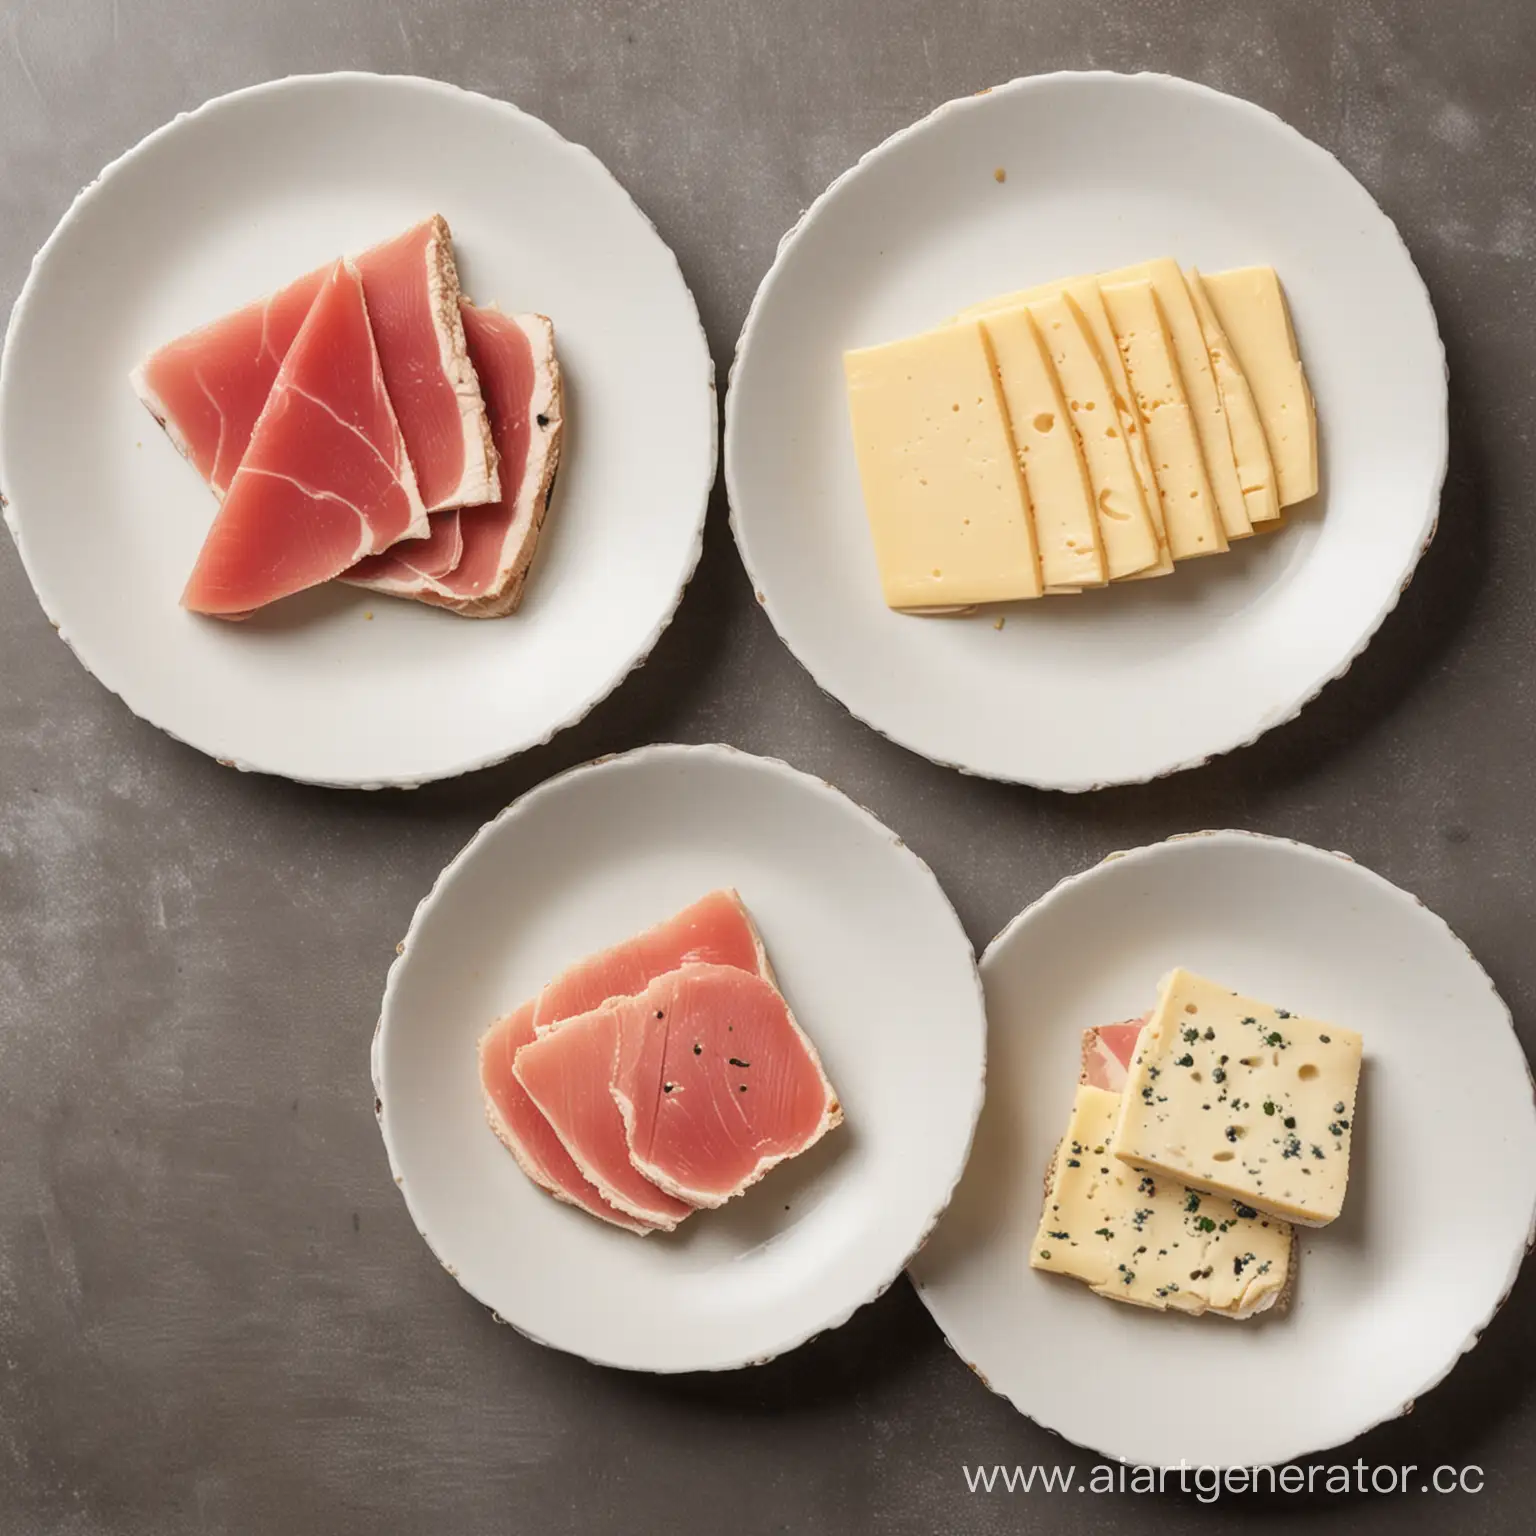 Diverse-Cheese-and-Tuna-Presentations-on-Elegant-Plates